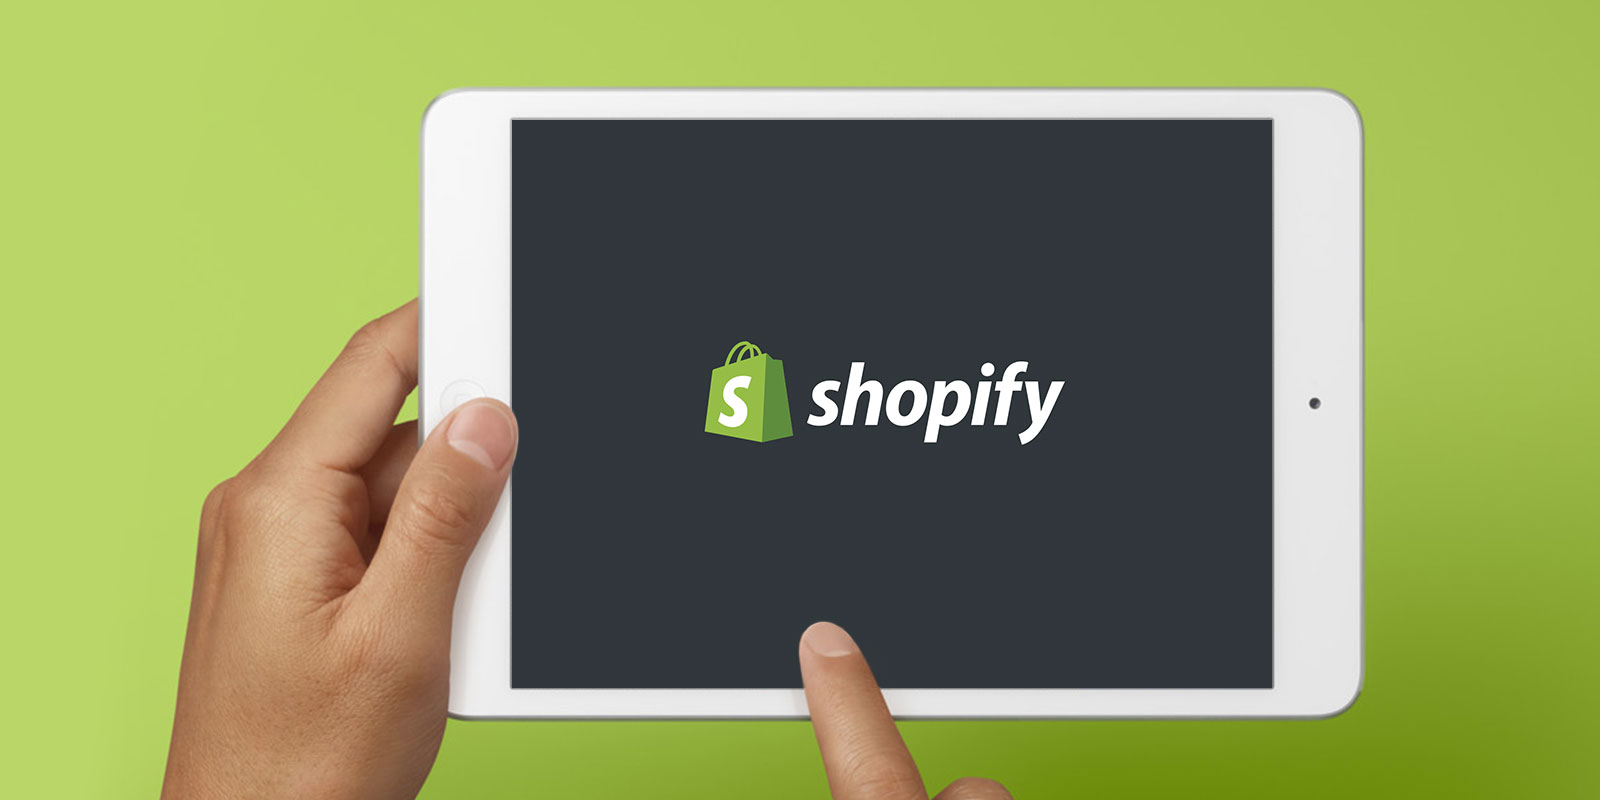 What Features Does Shopify Offer Over Other Ecomm Platforms?